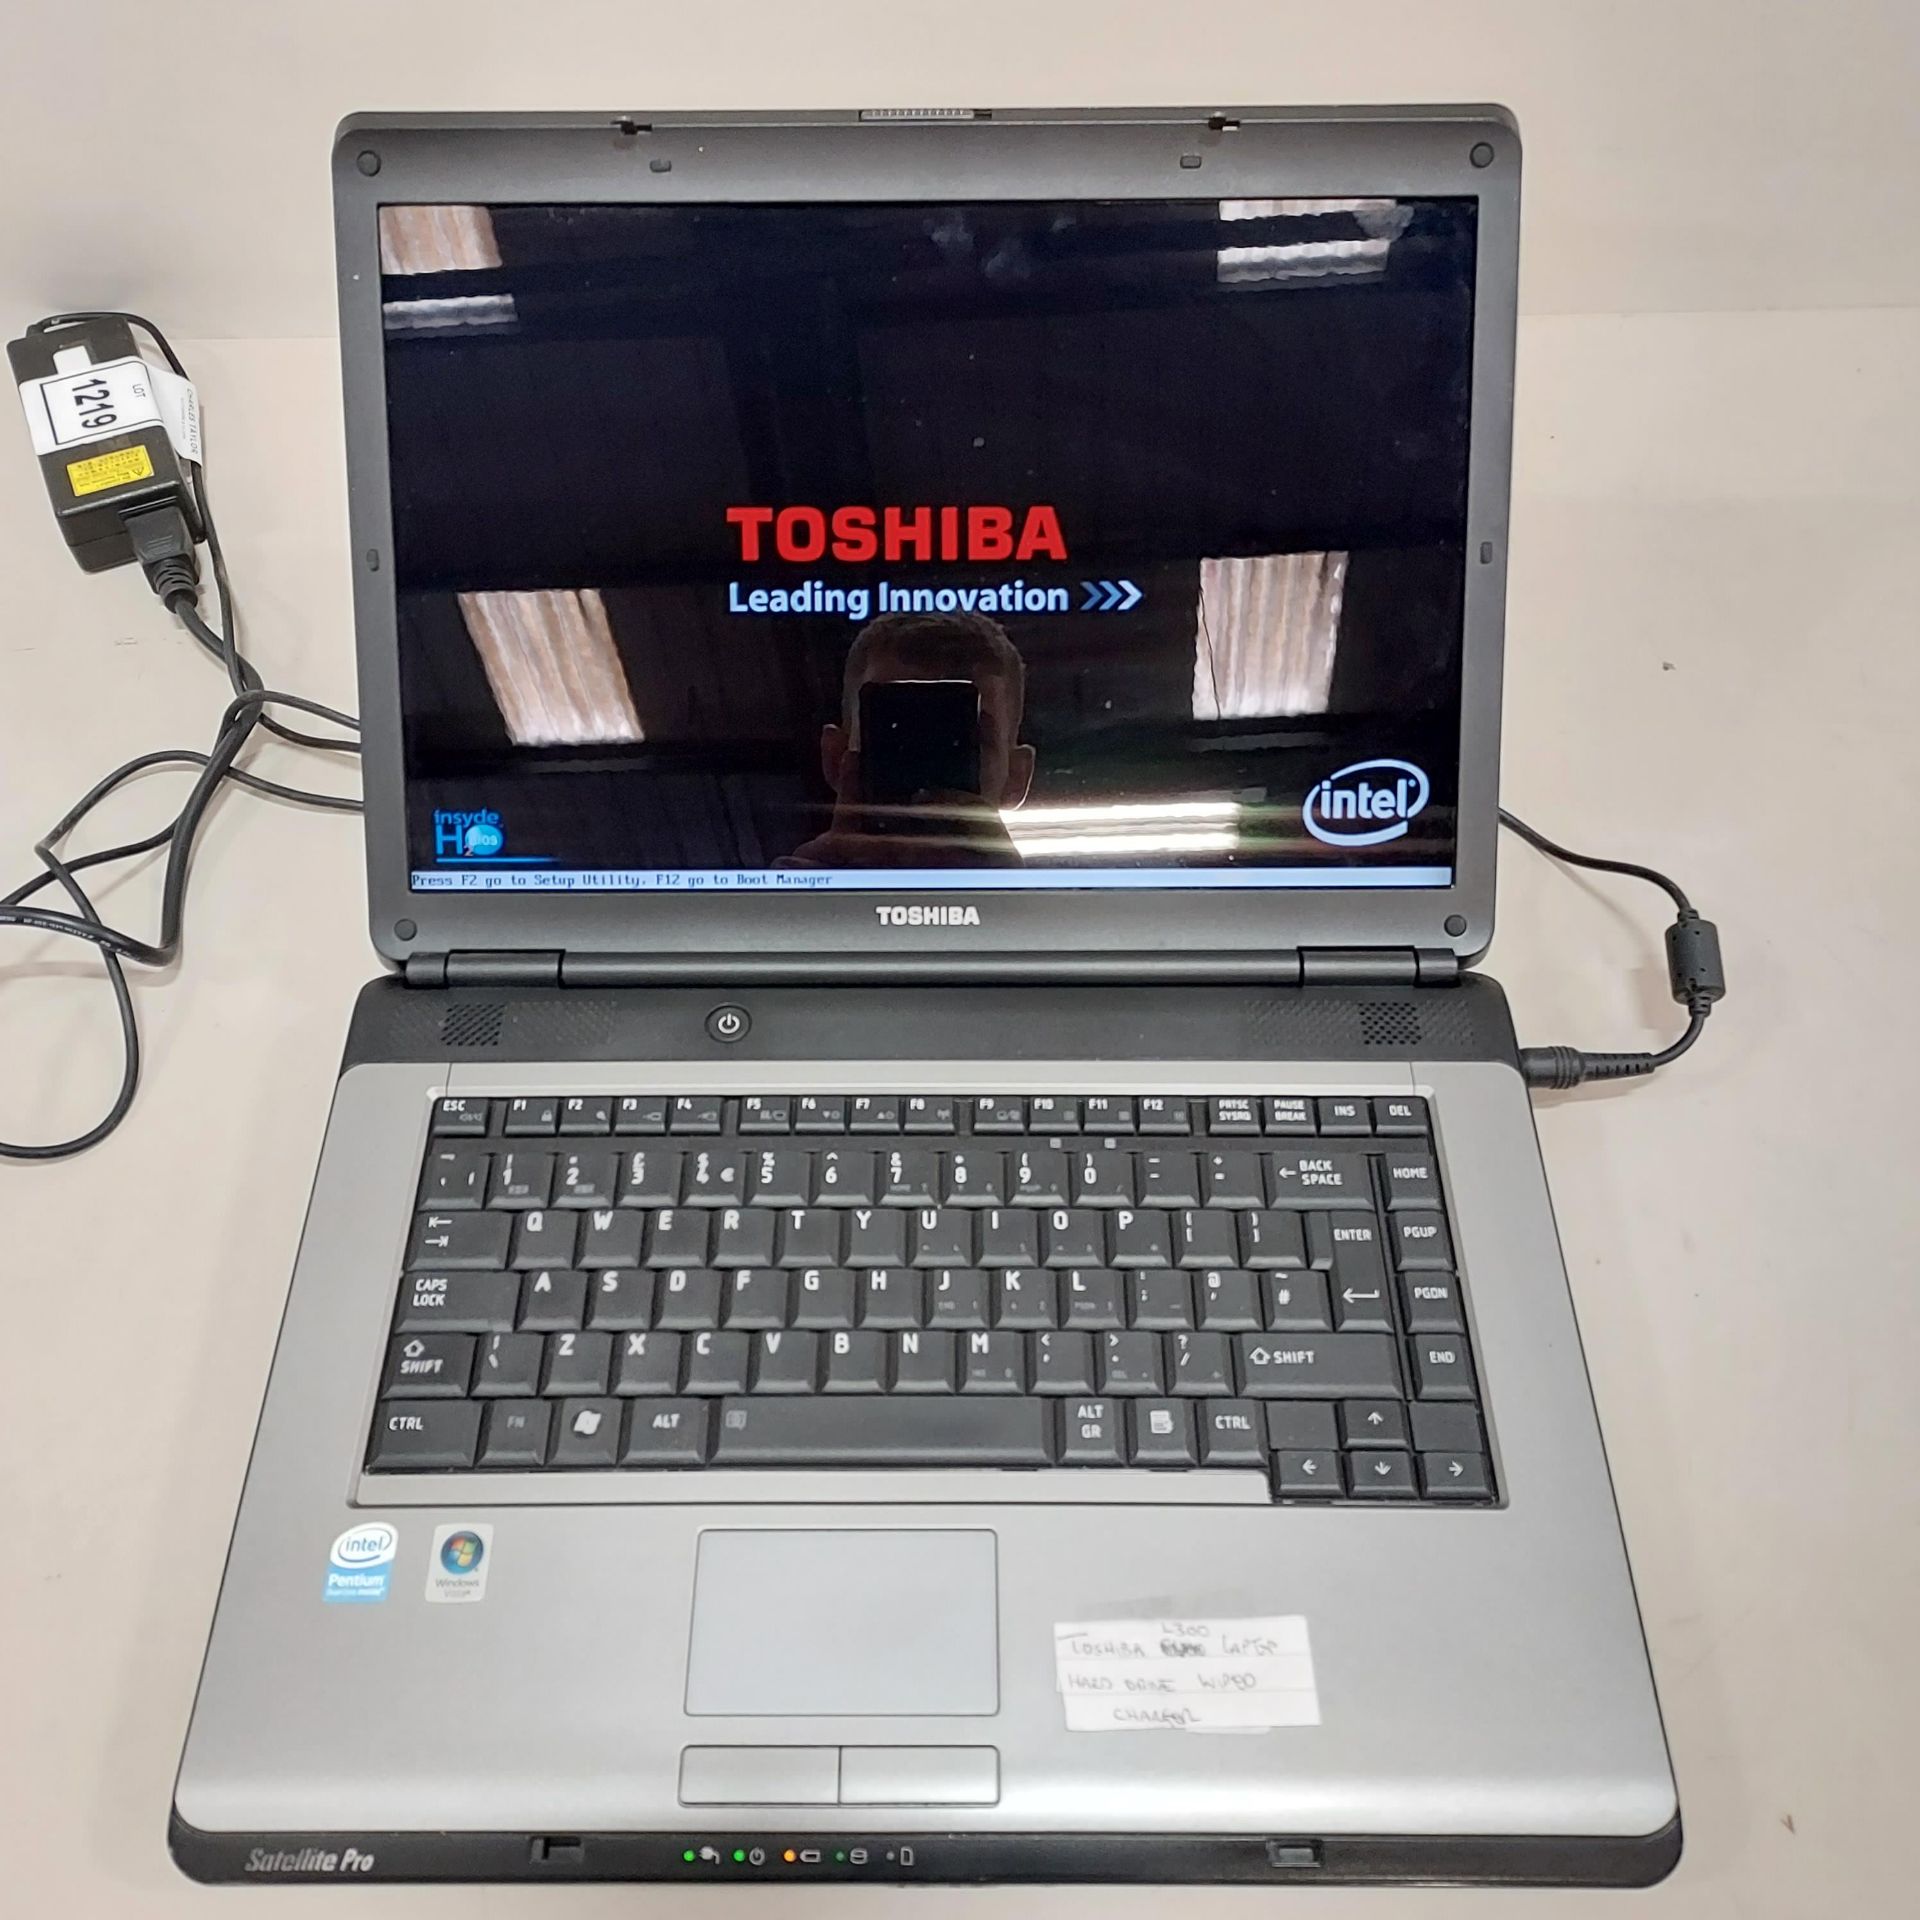 1 X TOSHIBA L300 LAPTOP - HARD DRIVE WIPED - NO OS - WITH CHARGER